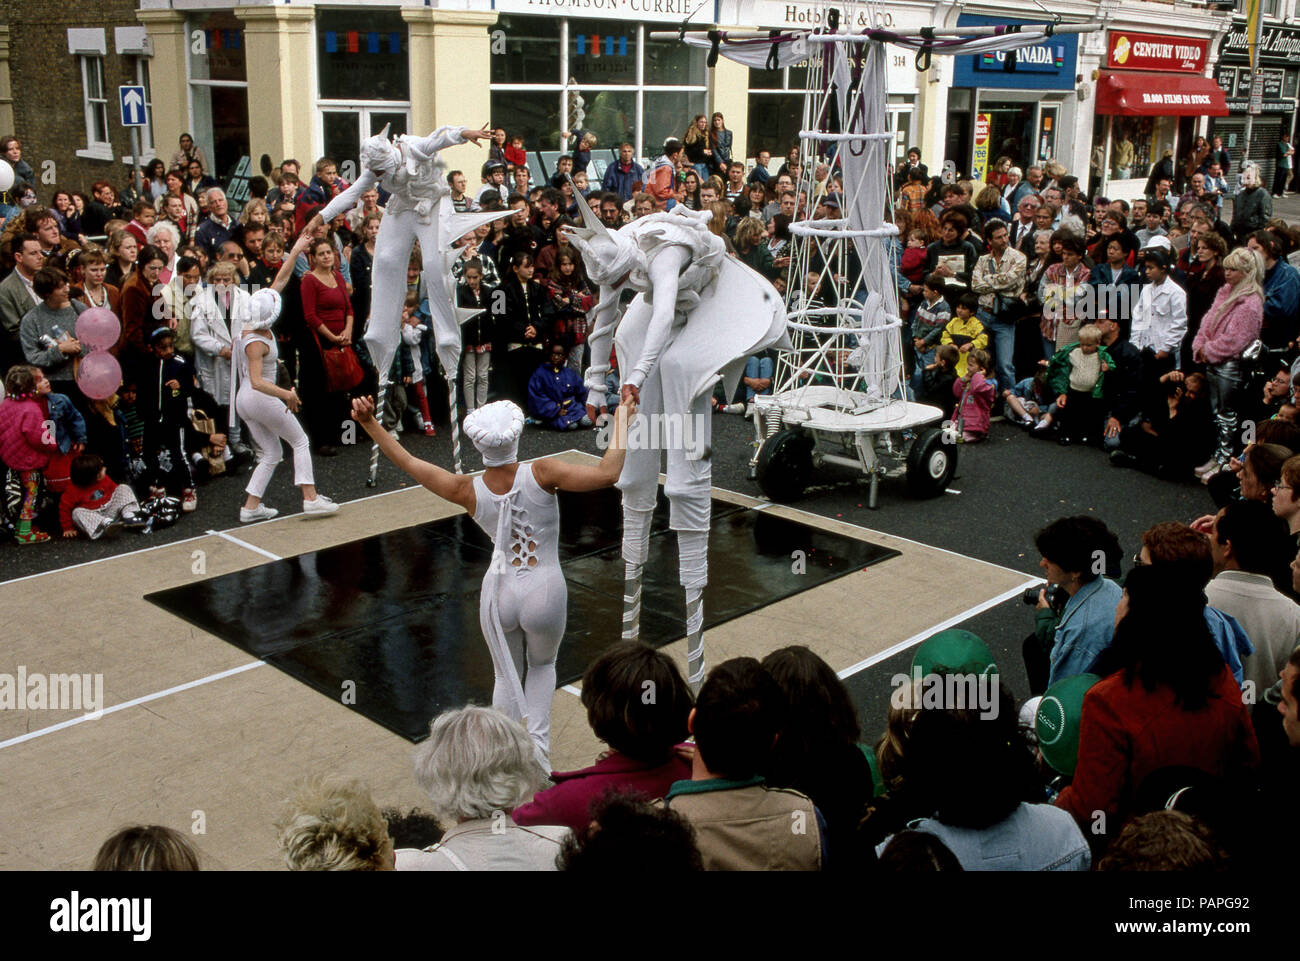 Street festival in Walthamstow London with entertainers walking on stilts Stock Photo